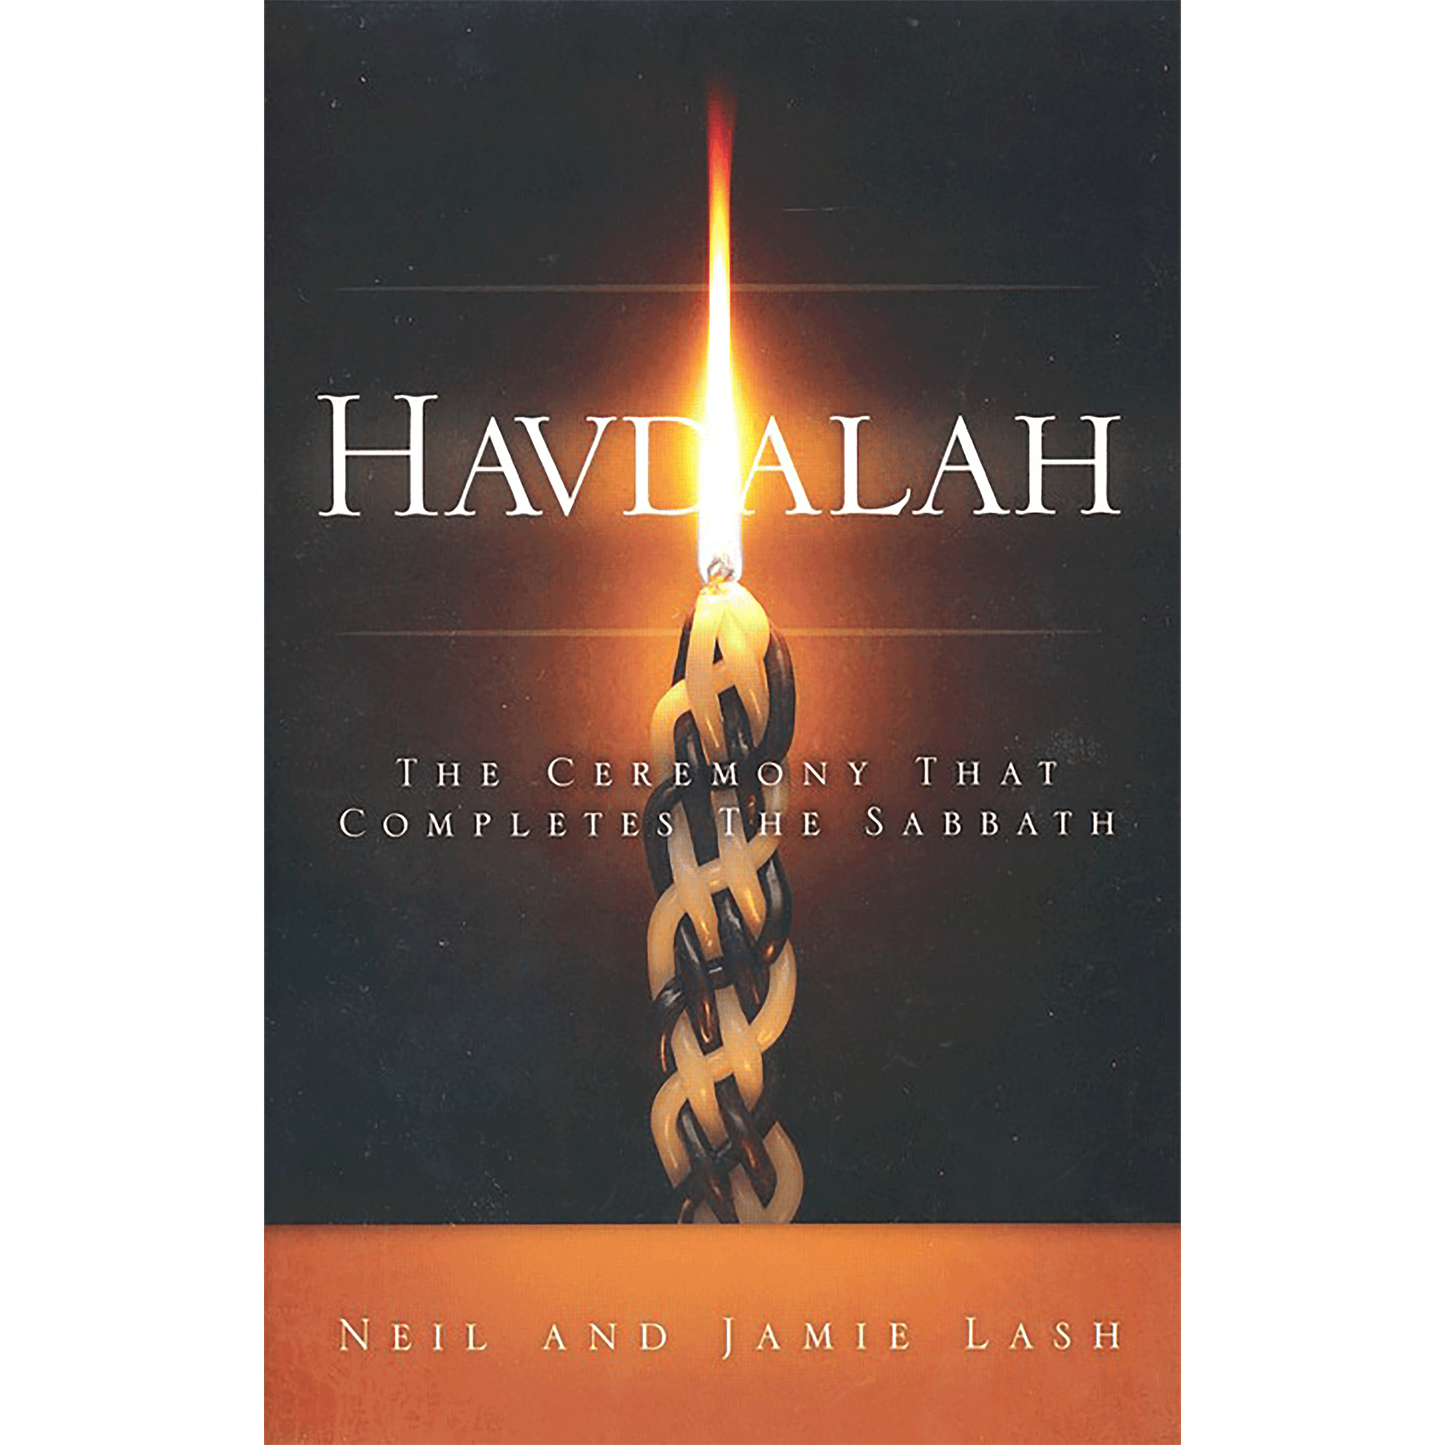 Havdalah: The Ceremony That Completes The Sabbath